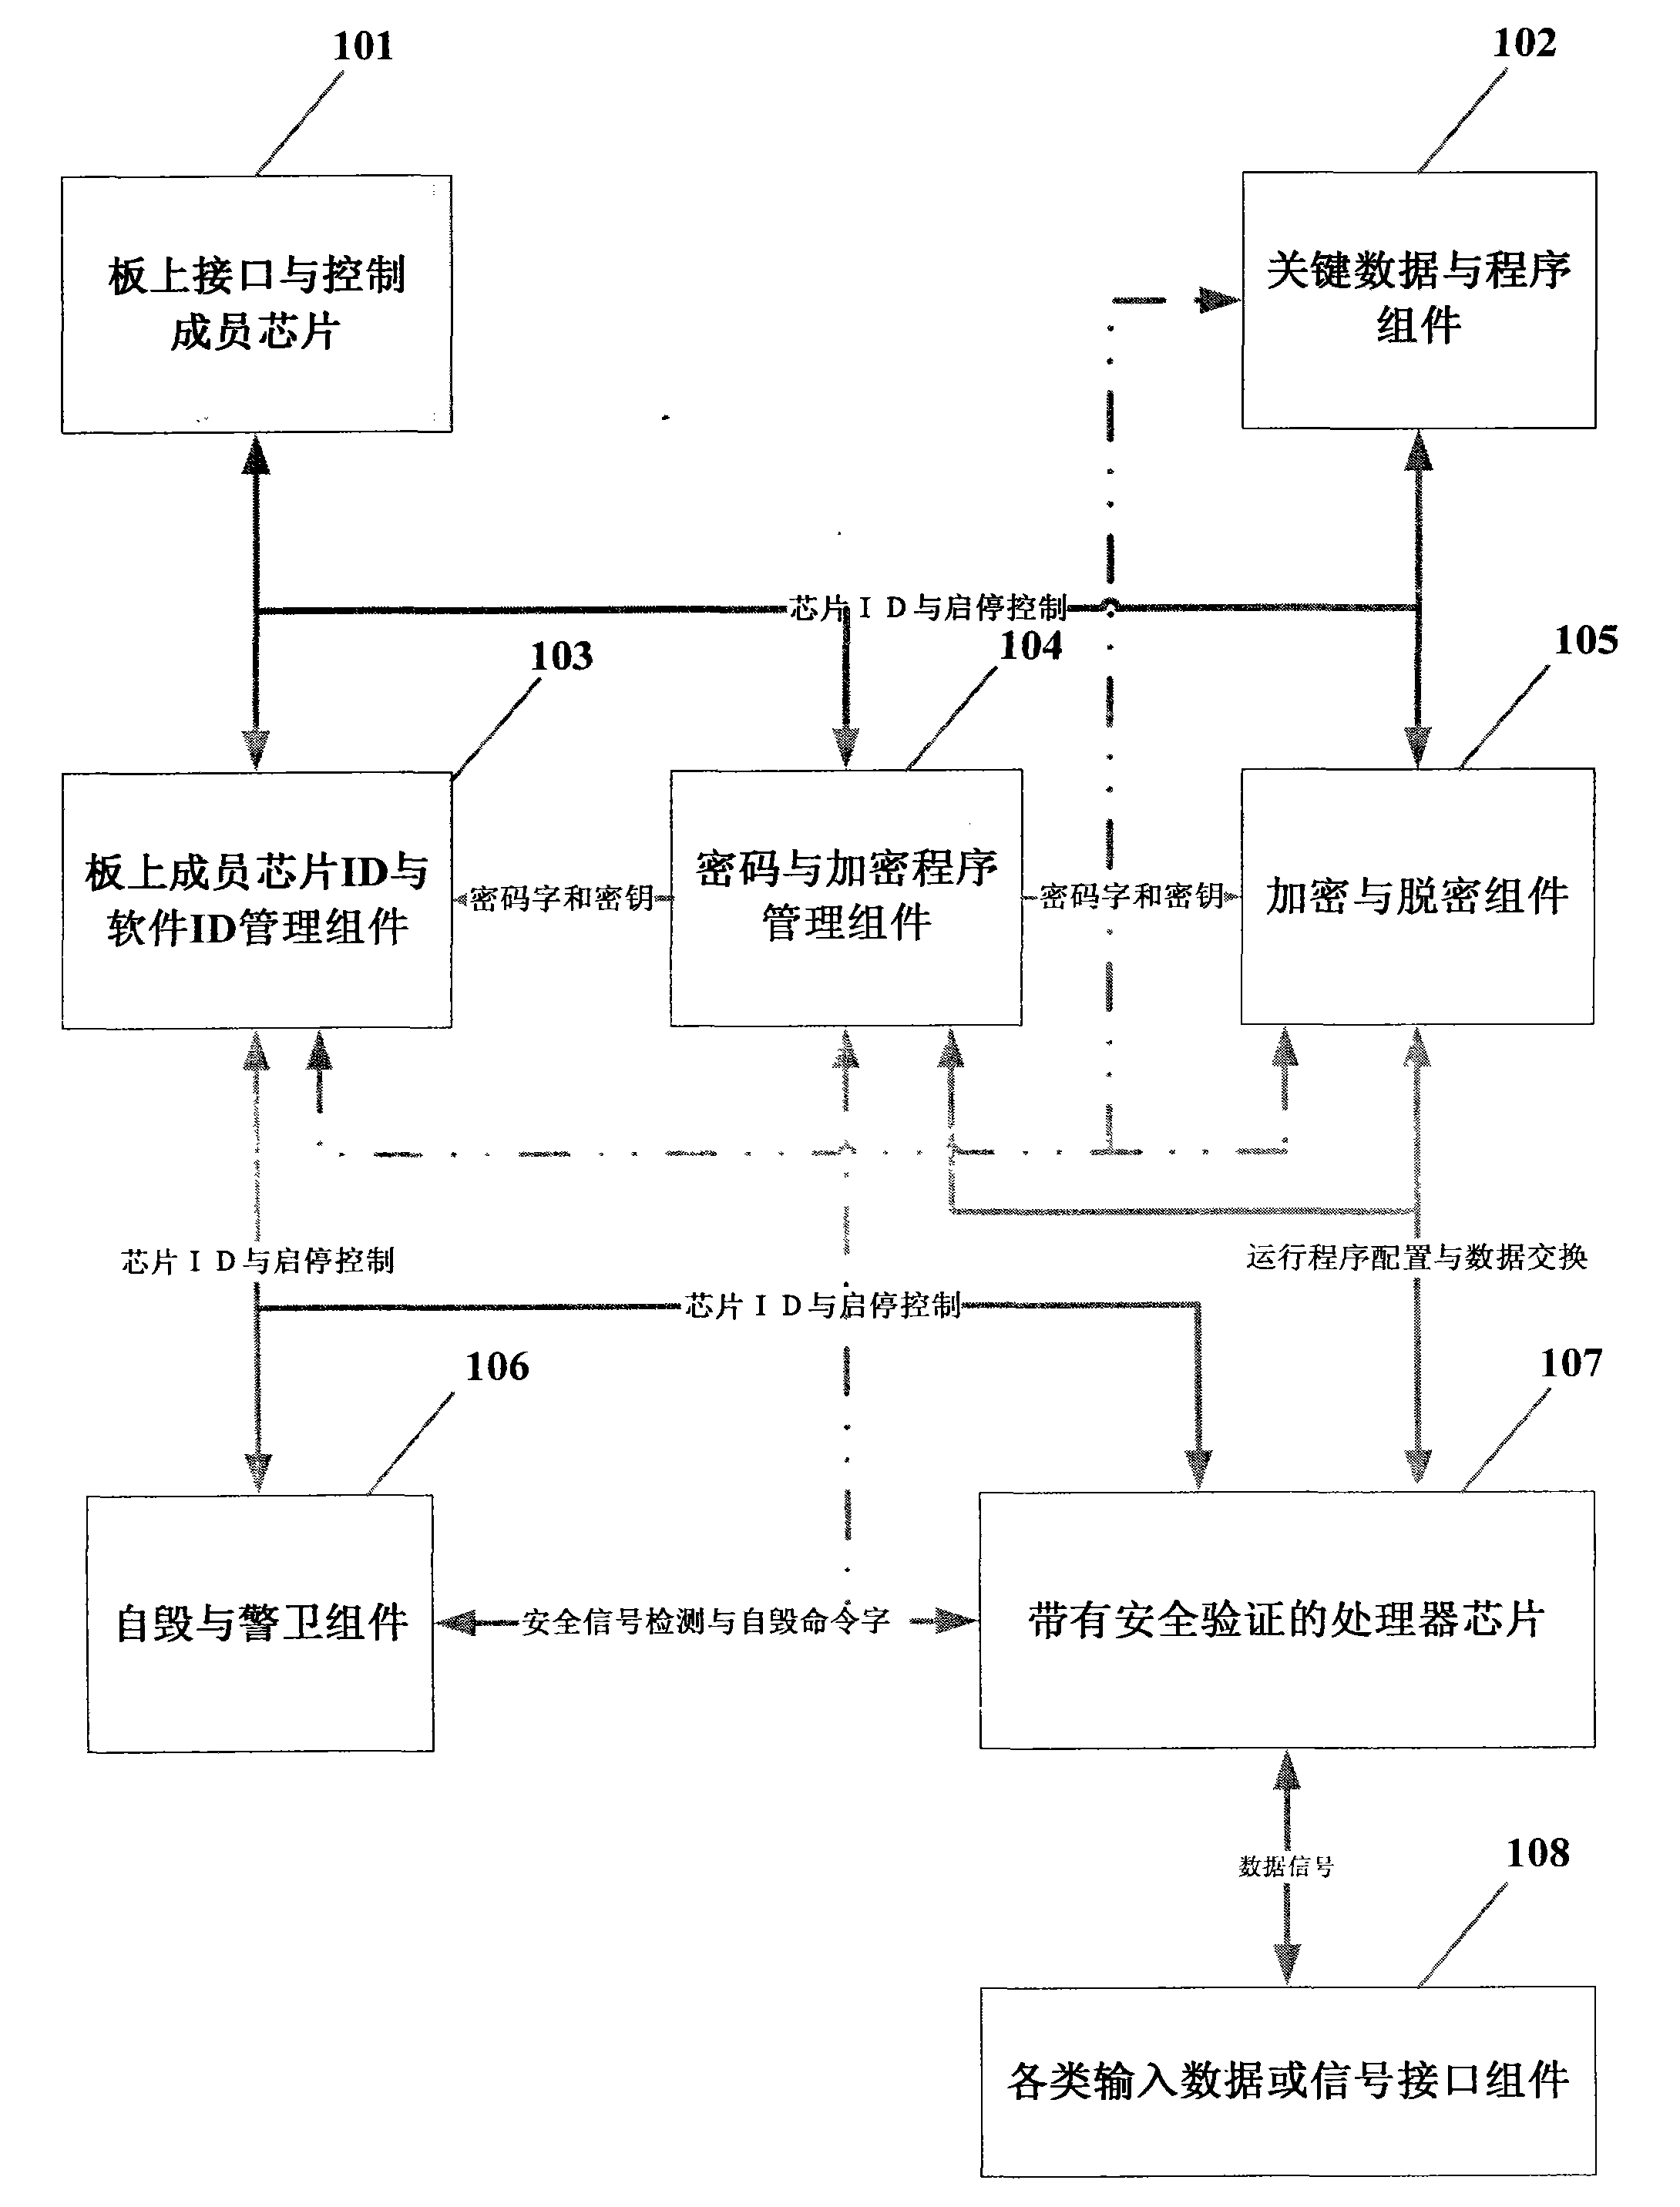 Dereplication encryption lock for software and hardware of embedded system